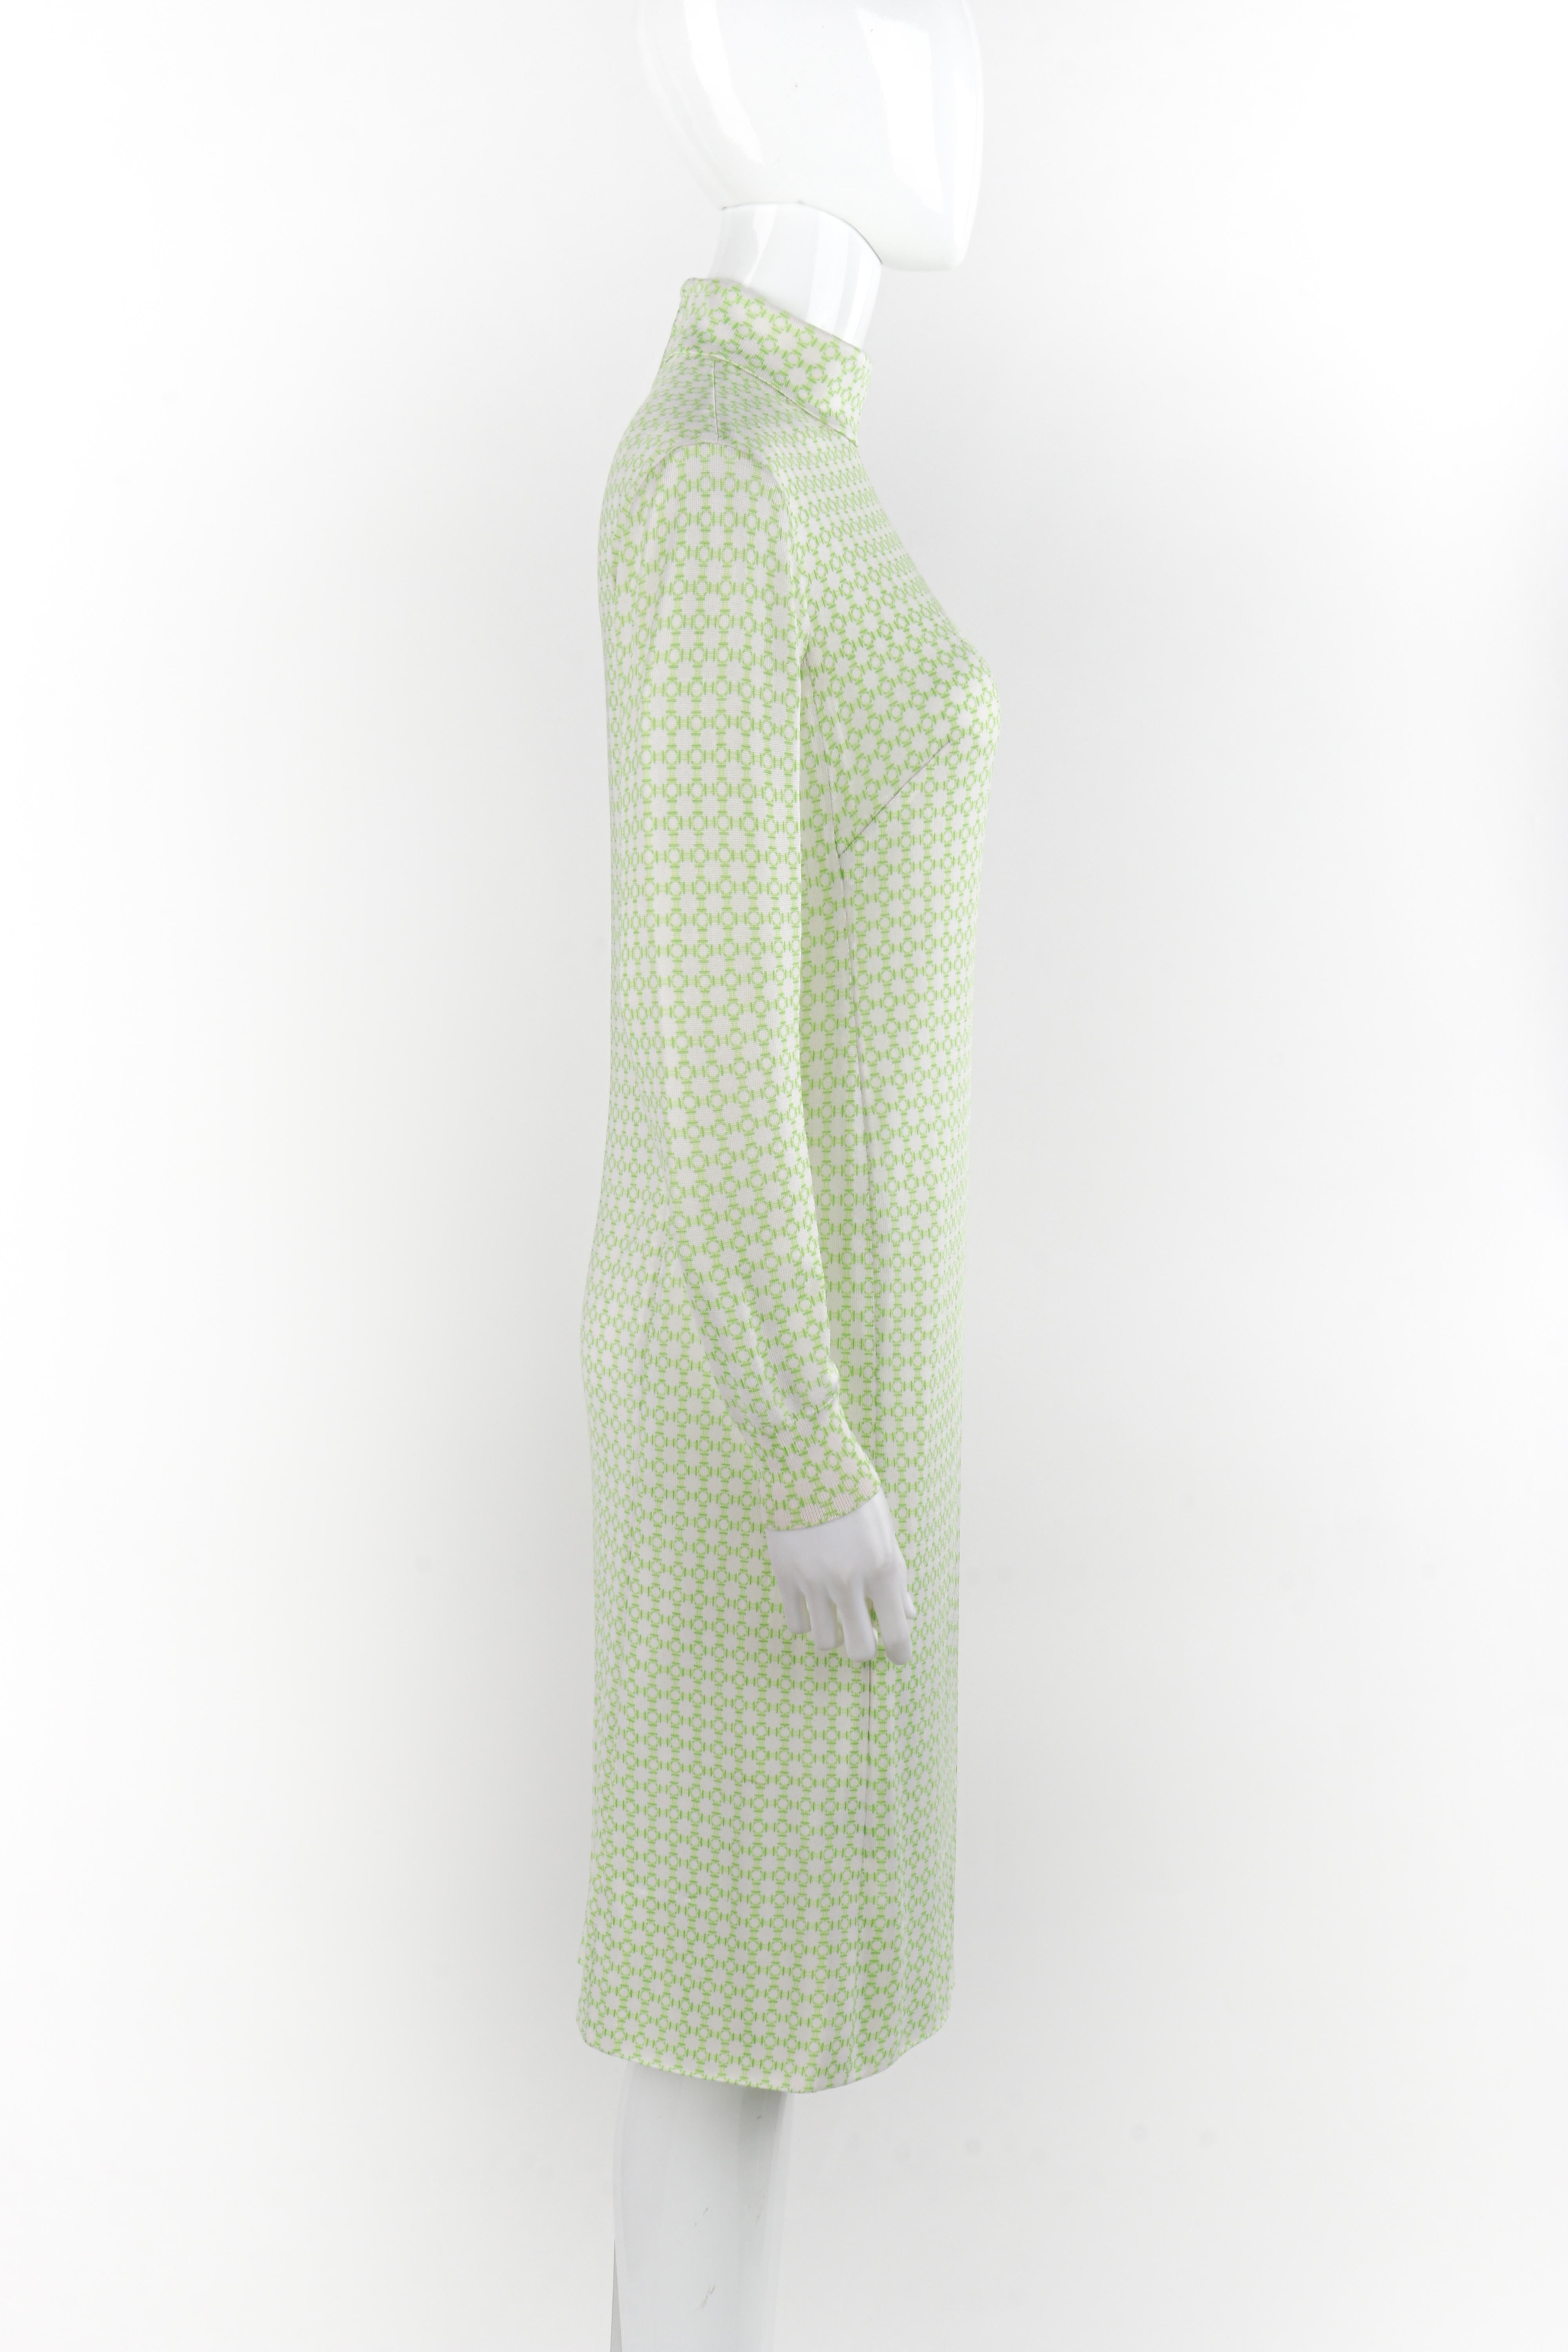 HERMES c.1970s Green White Printed Knit Long Sleeve Turtleneck Midi Dress In Good Condition For Sale In Thiensville, WI